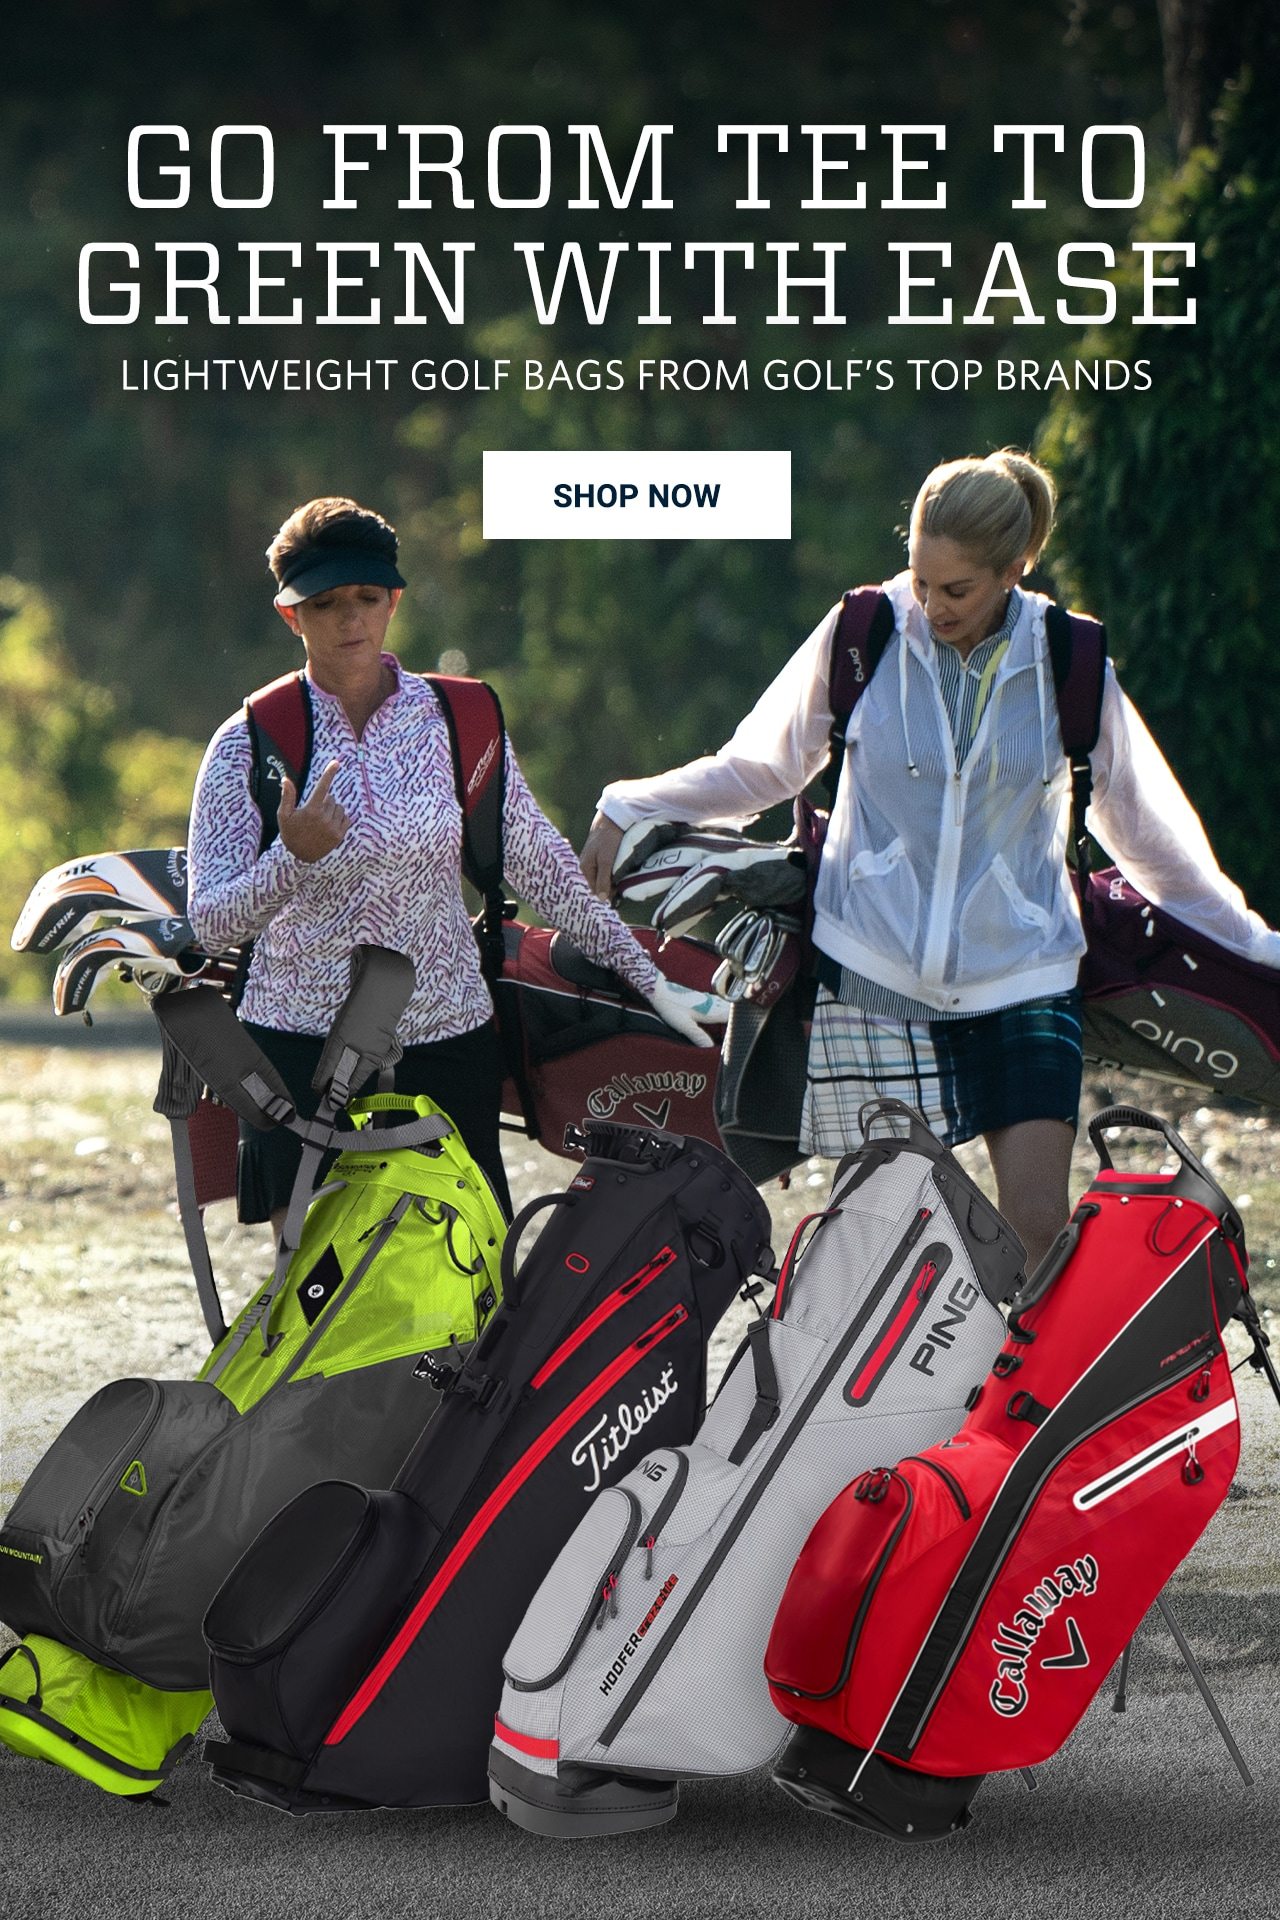 Go From Tee to Green With Ease. Lightweight Golf Bags From Golf's Top Brands. Shop Now.